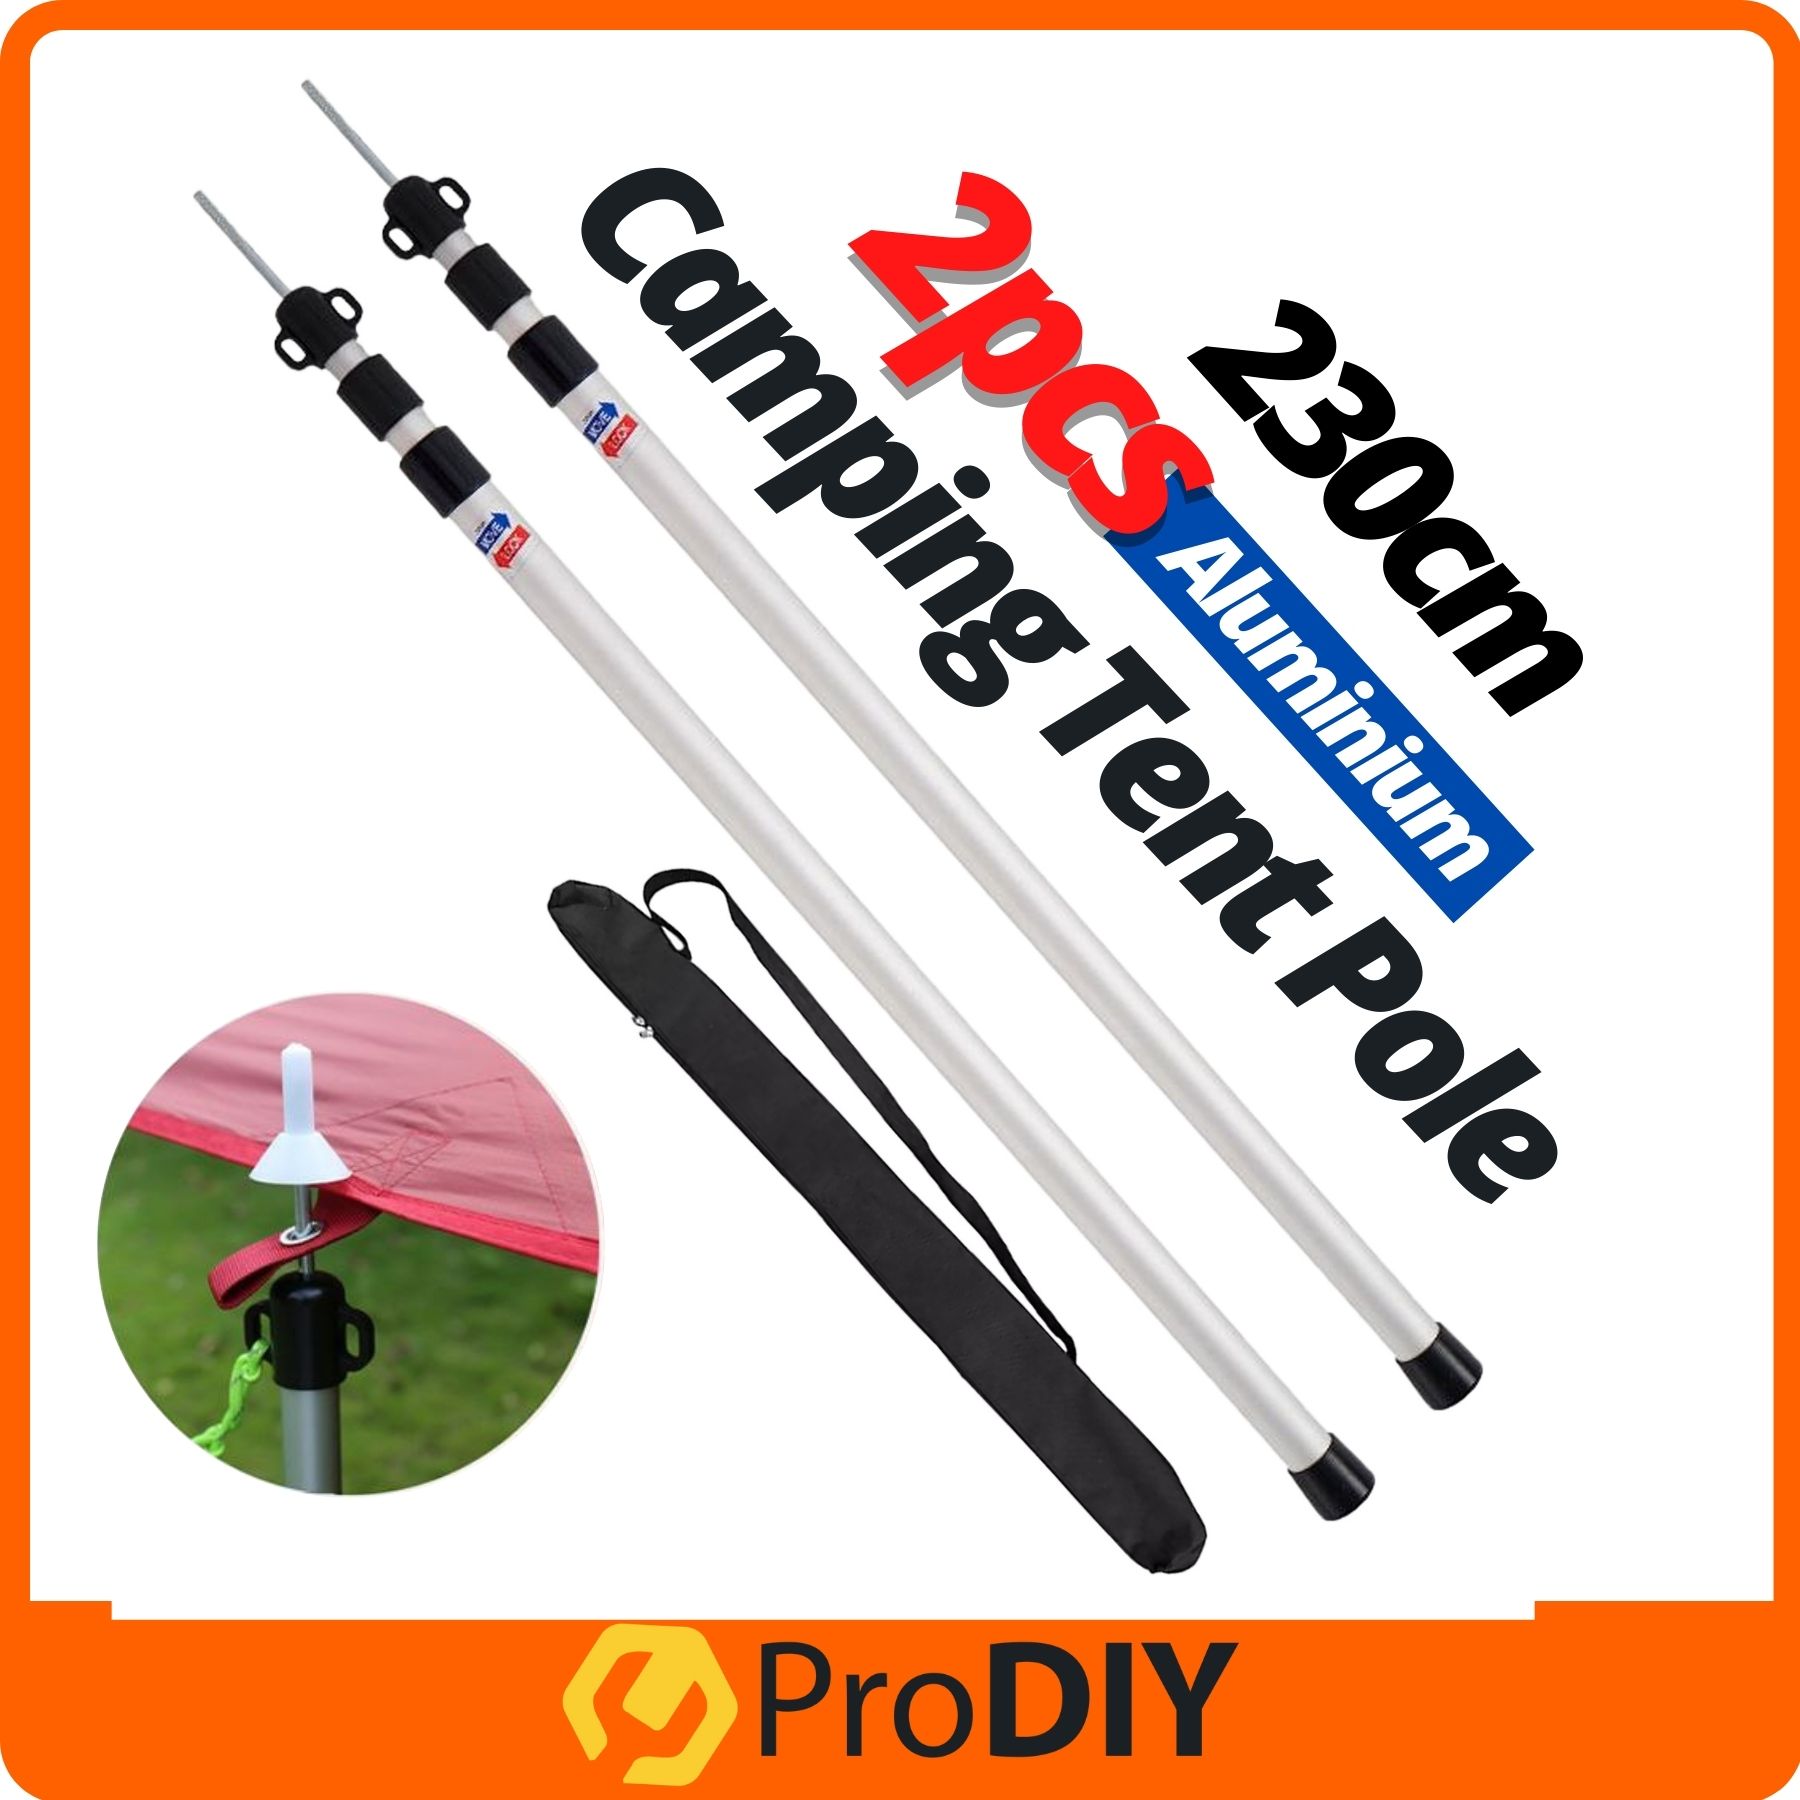 2PCS Camping Tent Strong Poles Accessories Telescoping Tarp Pole Adjustable Aluminum Rod for Tent Camping Shelter Hiking